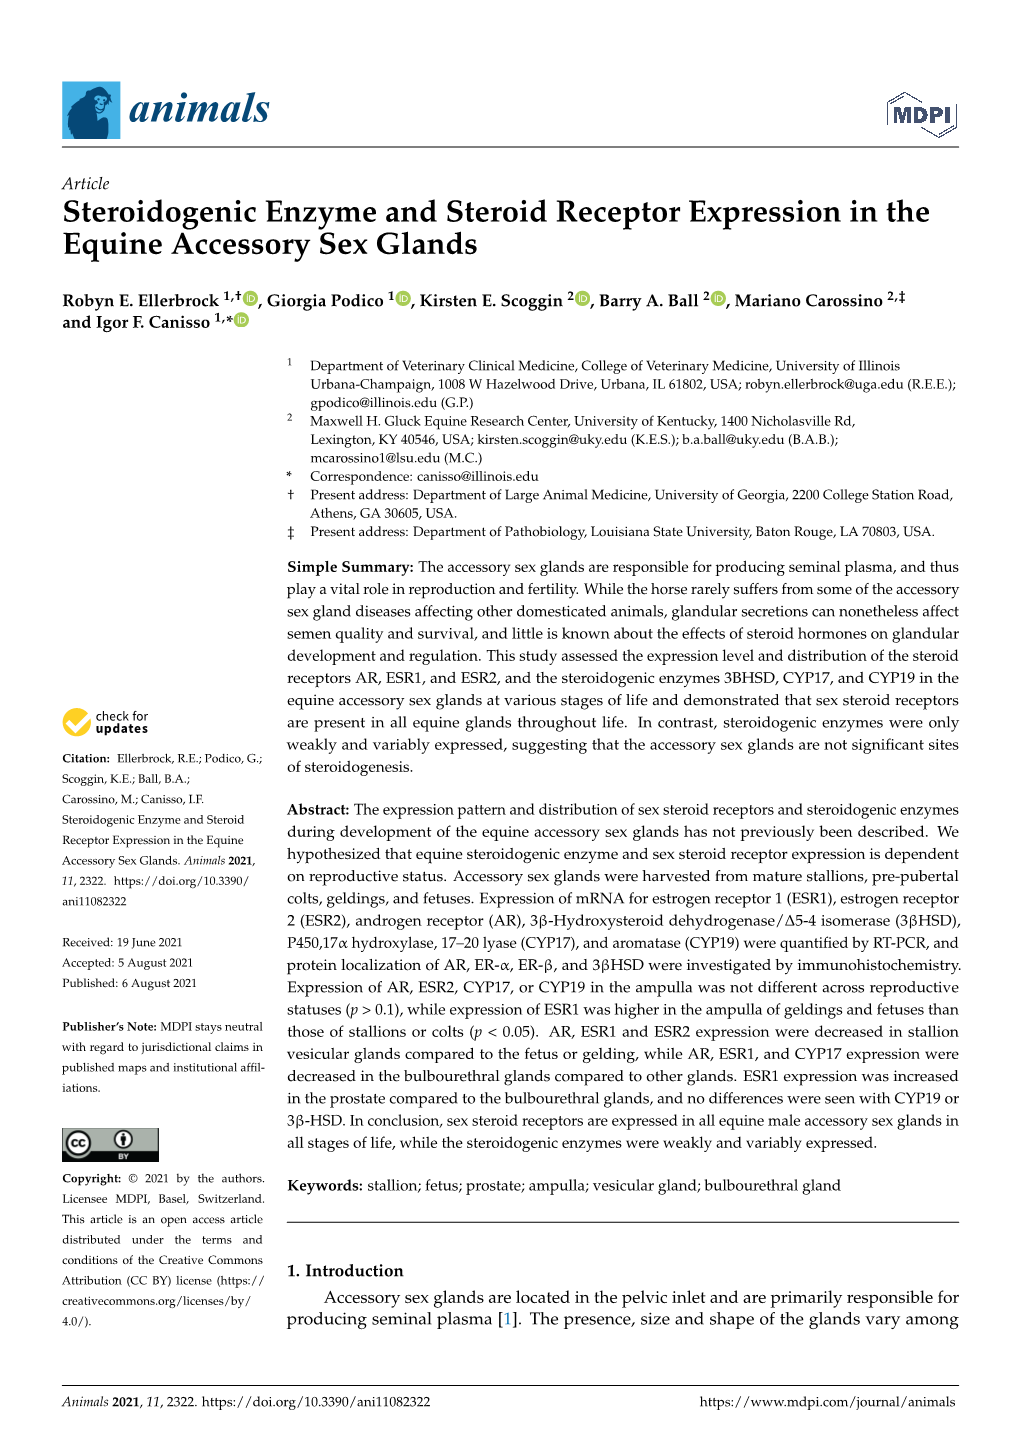 Steroidogenic Enzyme and Steroid Receptor Expression in the Equine Accessory Sex Glands